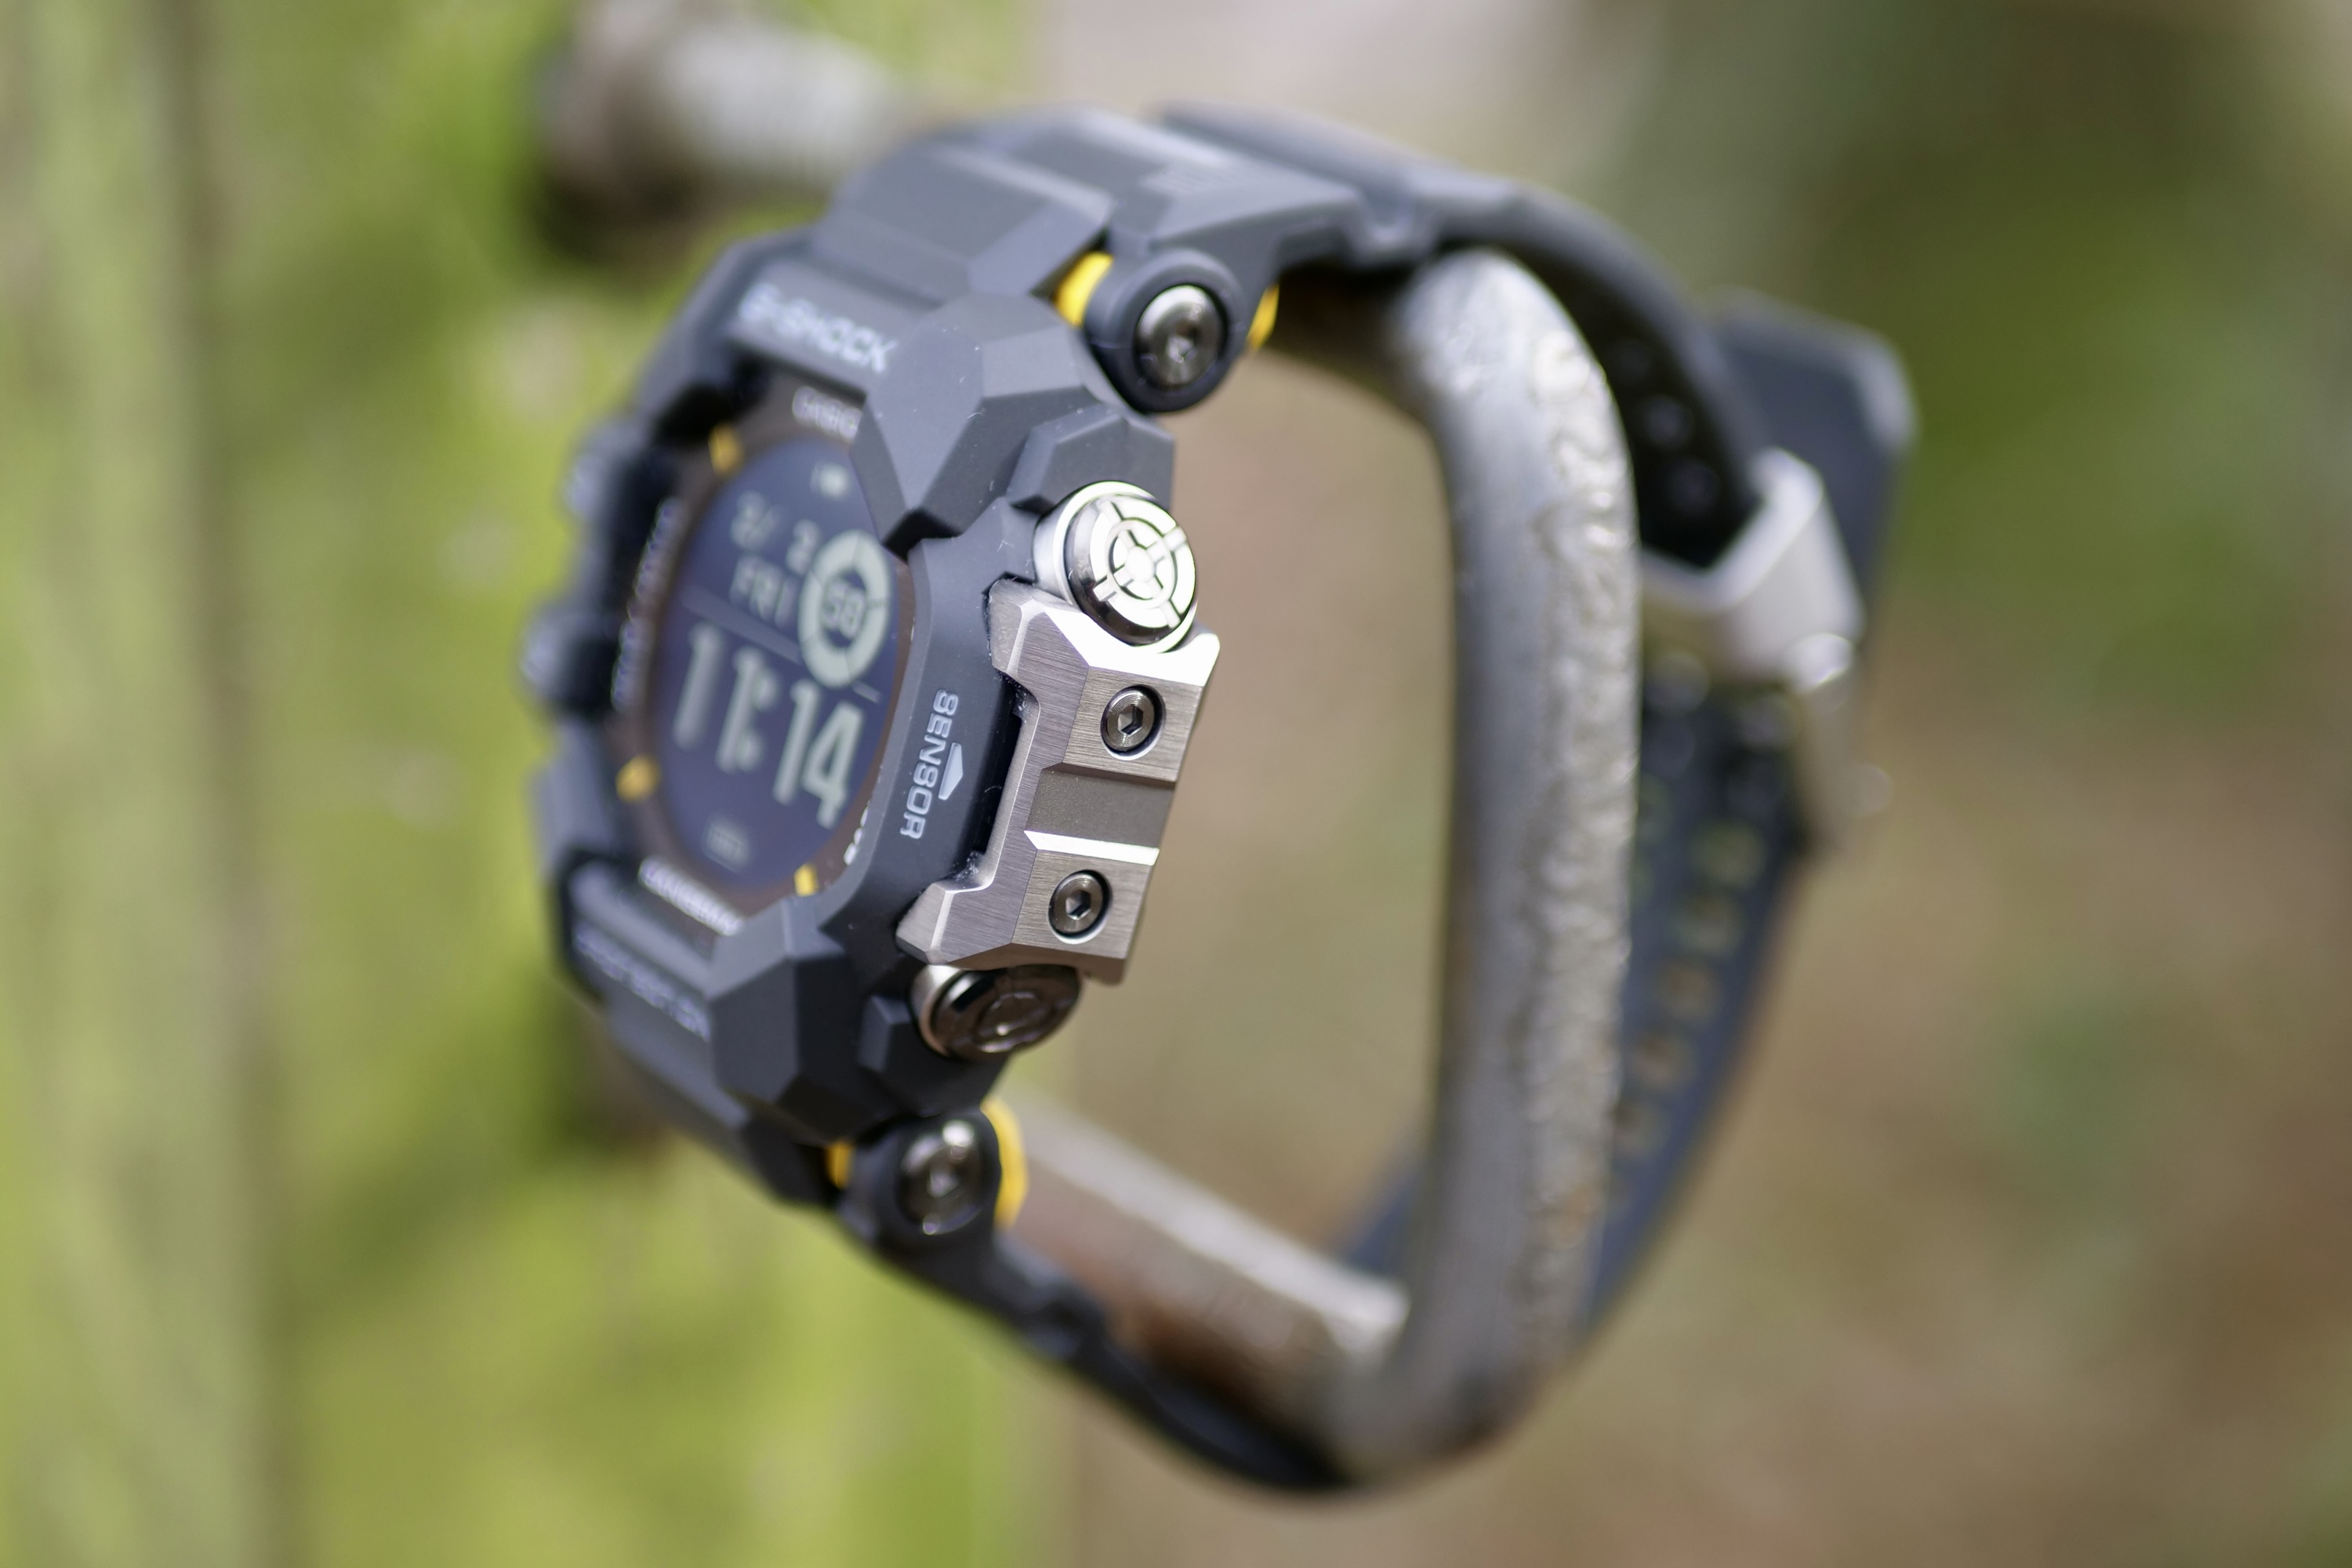 Casio G-Shock GSW-H1000 review: bad timing - The Verge